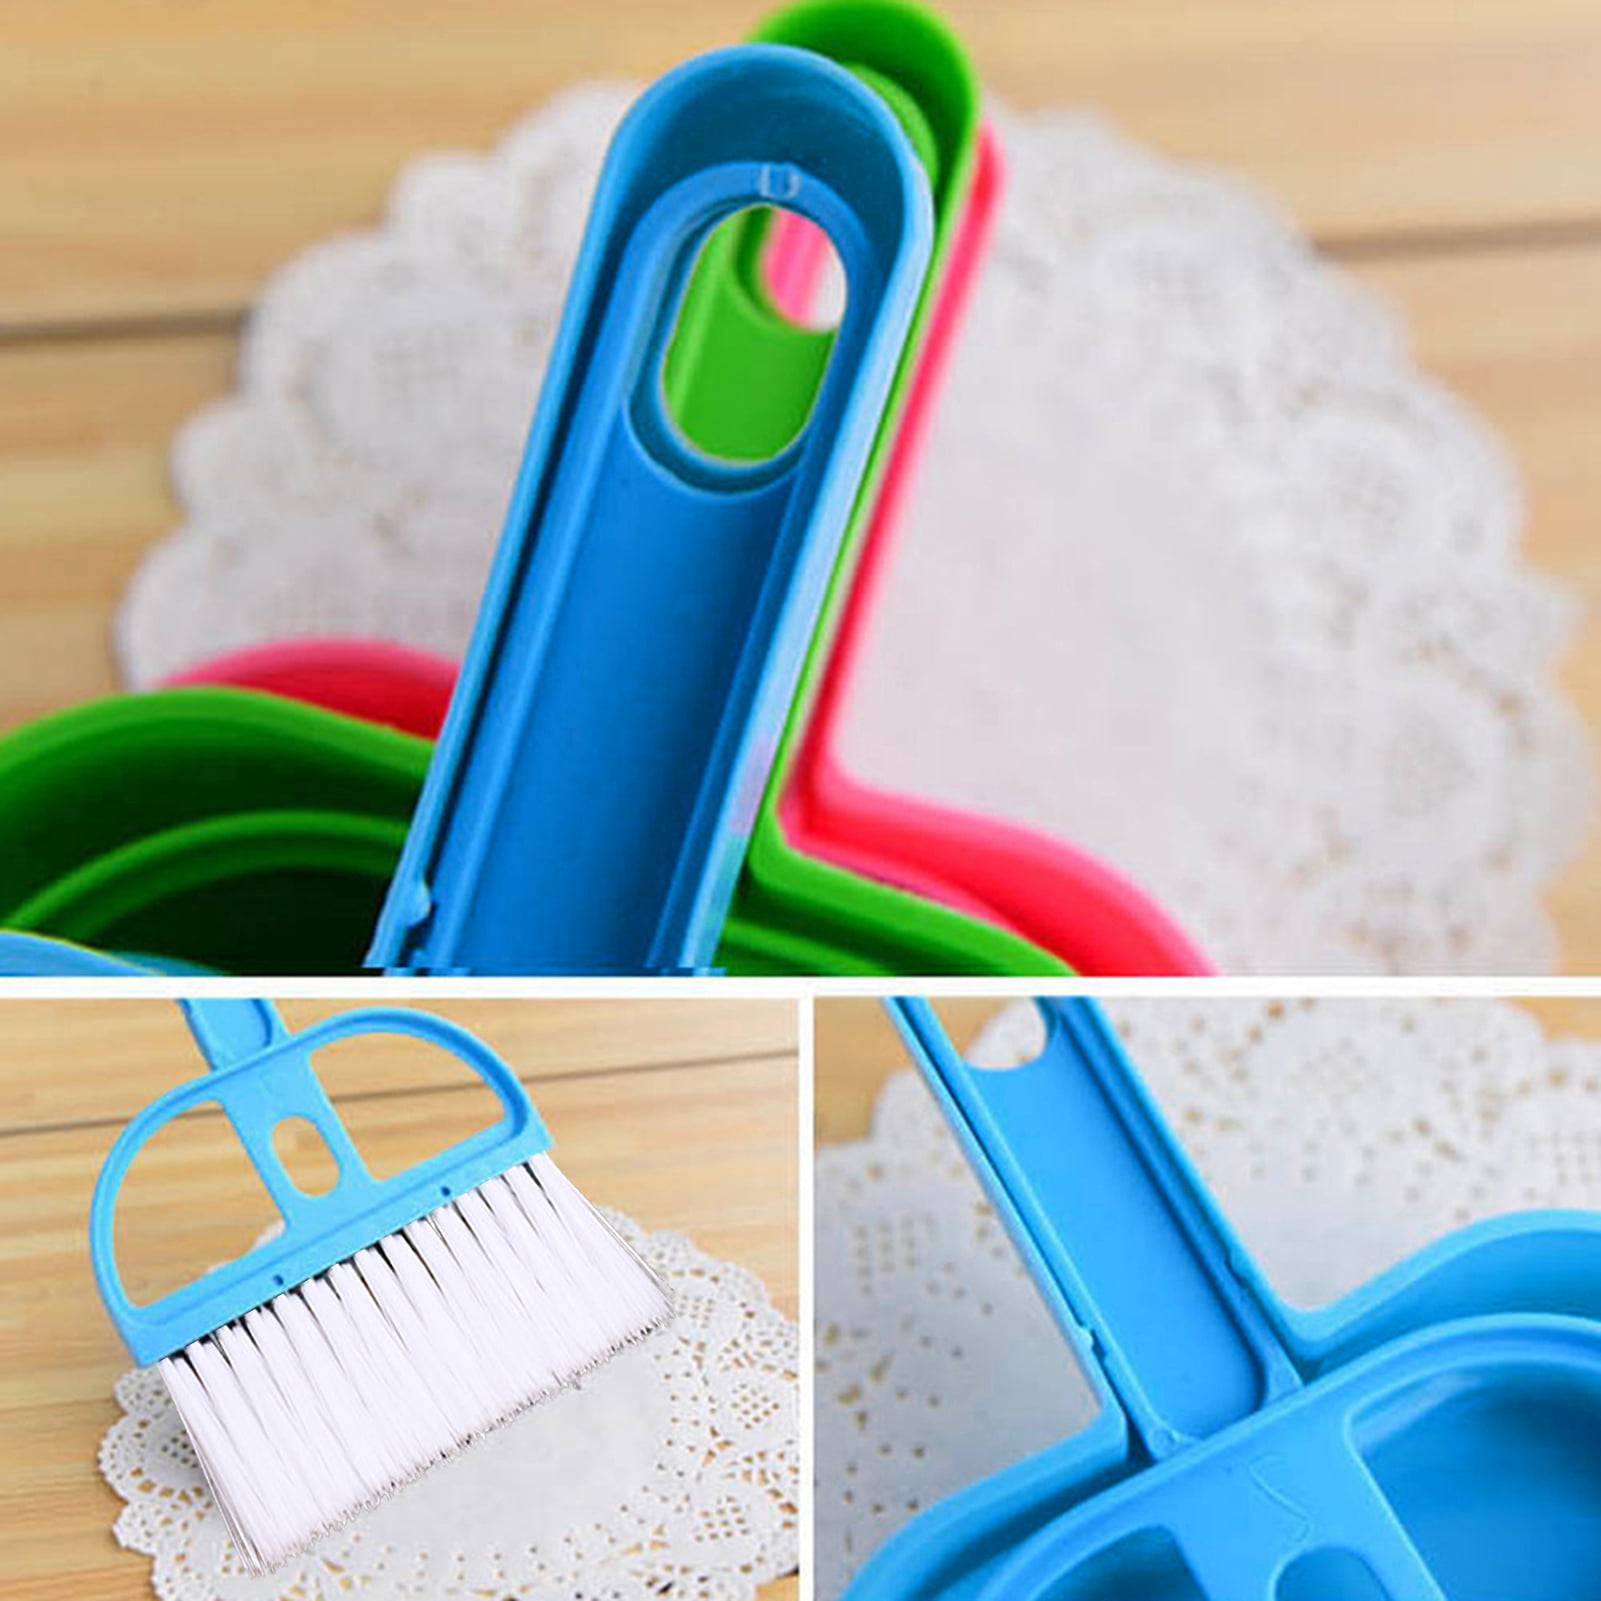 Small Whisk Type Broom Set Dust Pan Dustpan & Brush For Cleaning Tool  Outdoor